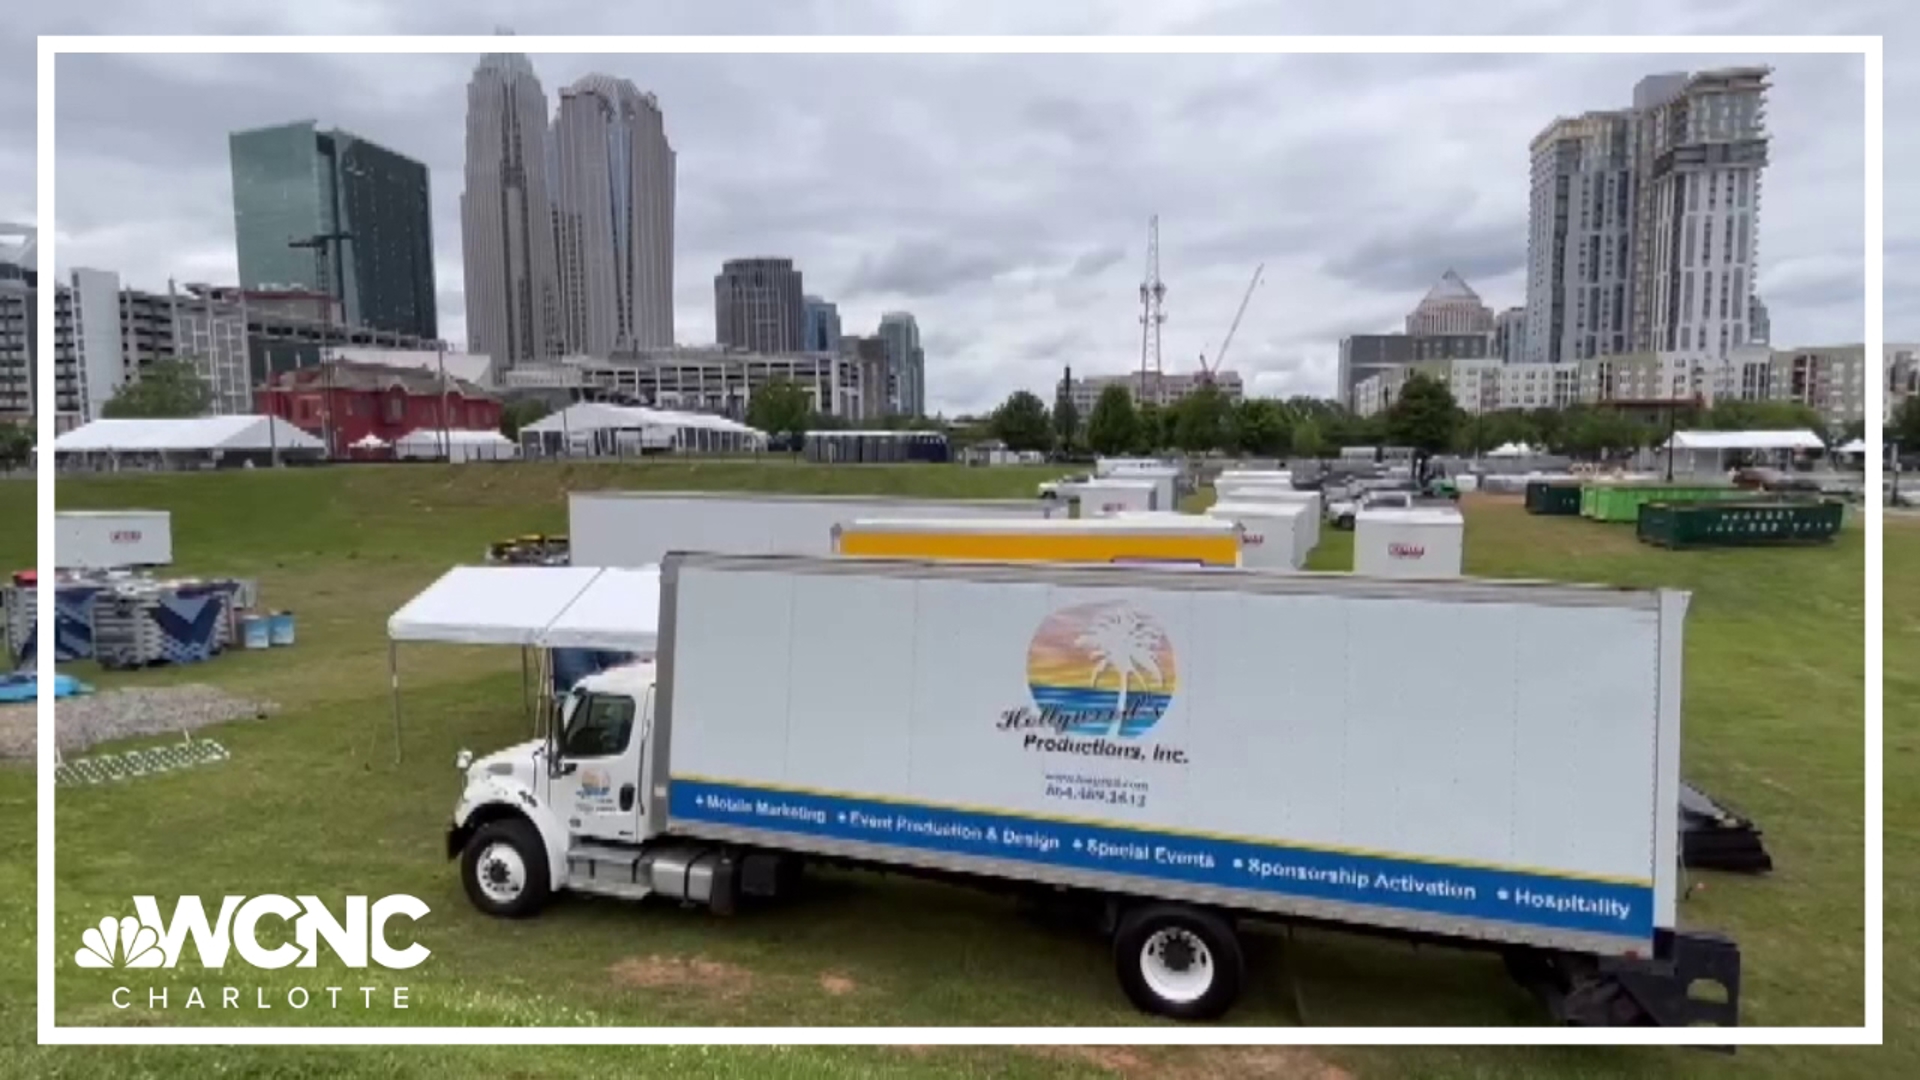 Officials with the city of Charlotte and the Lovin' Life Music Festival discuss plans ahead of the three-day event in Charlotte.